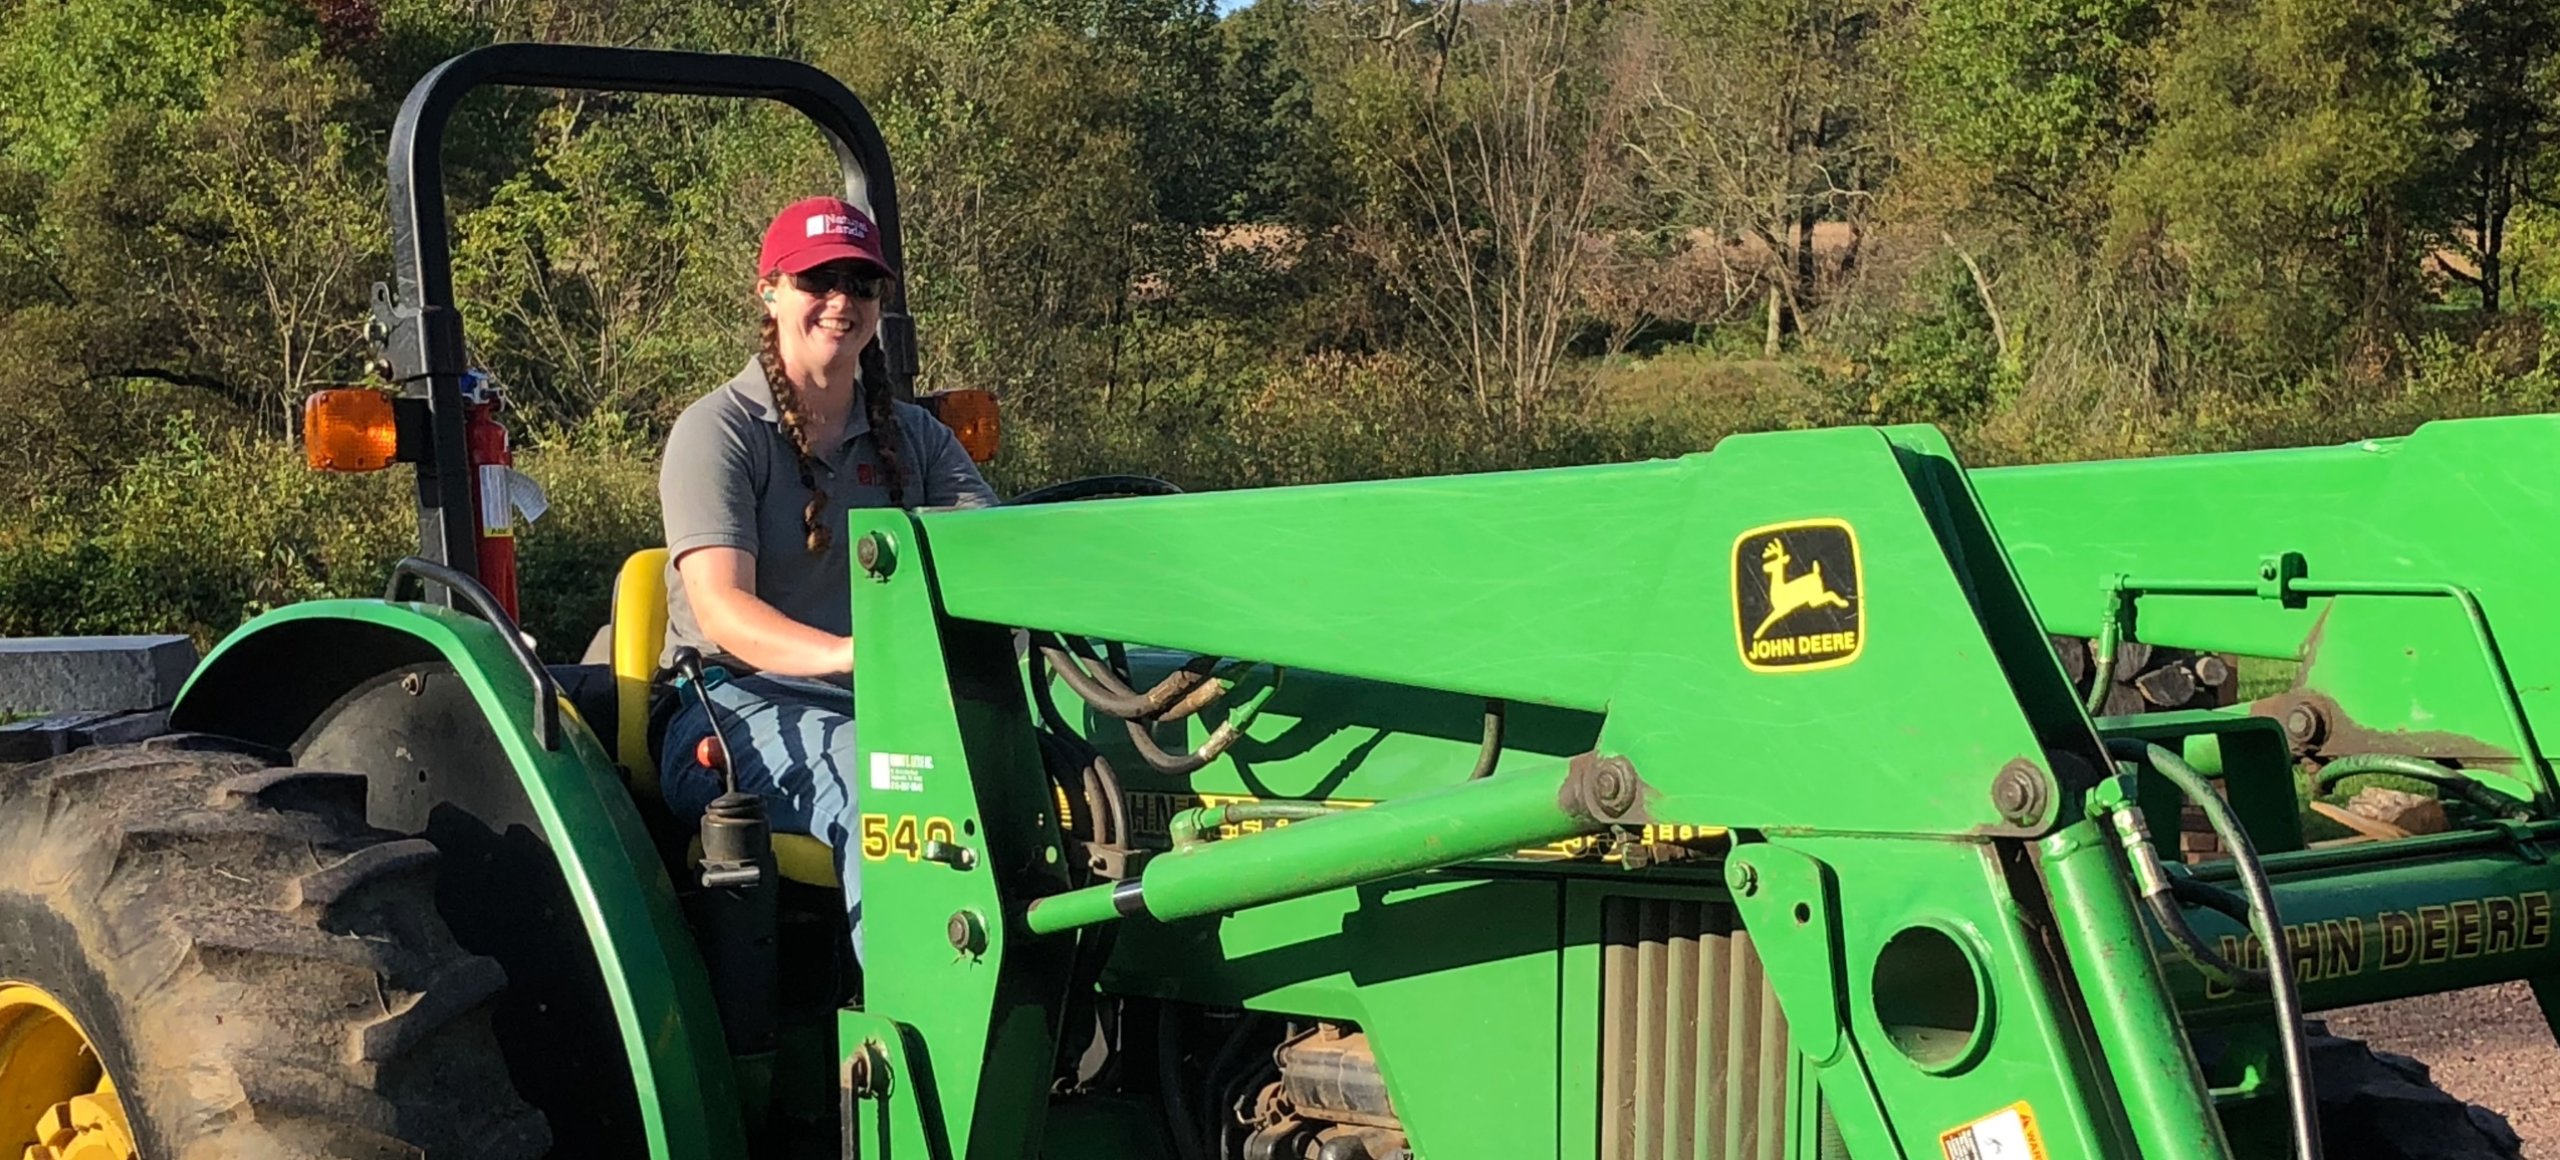 A person wearing a red ballcap sits in a large green tractor outside, smiling at the camera.